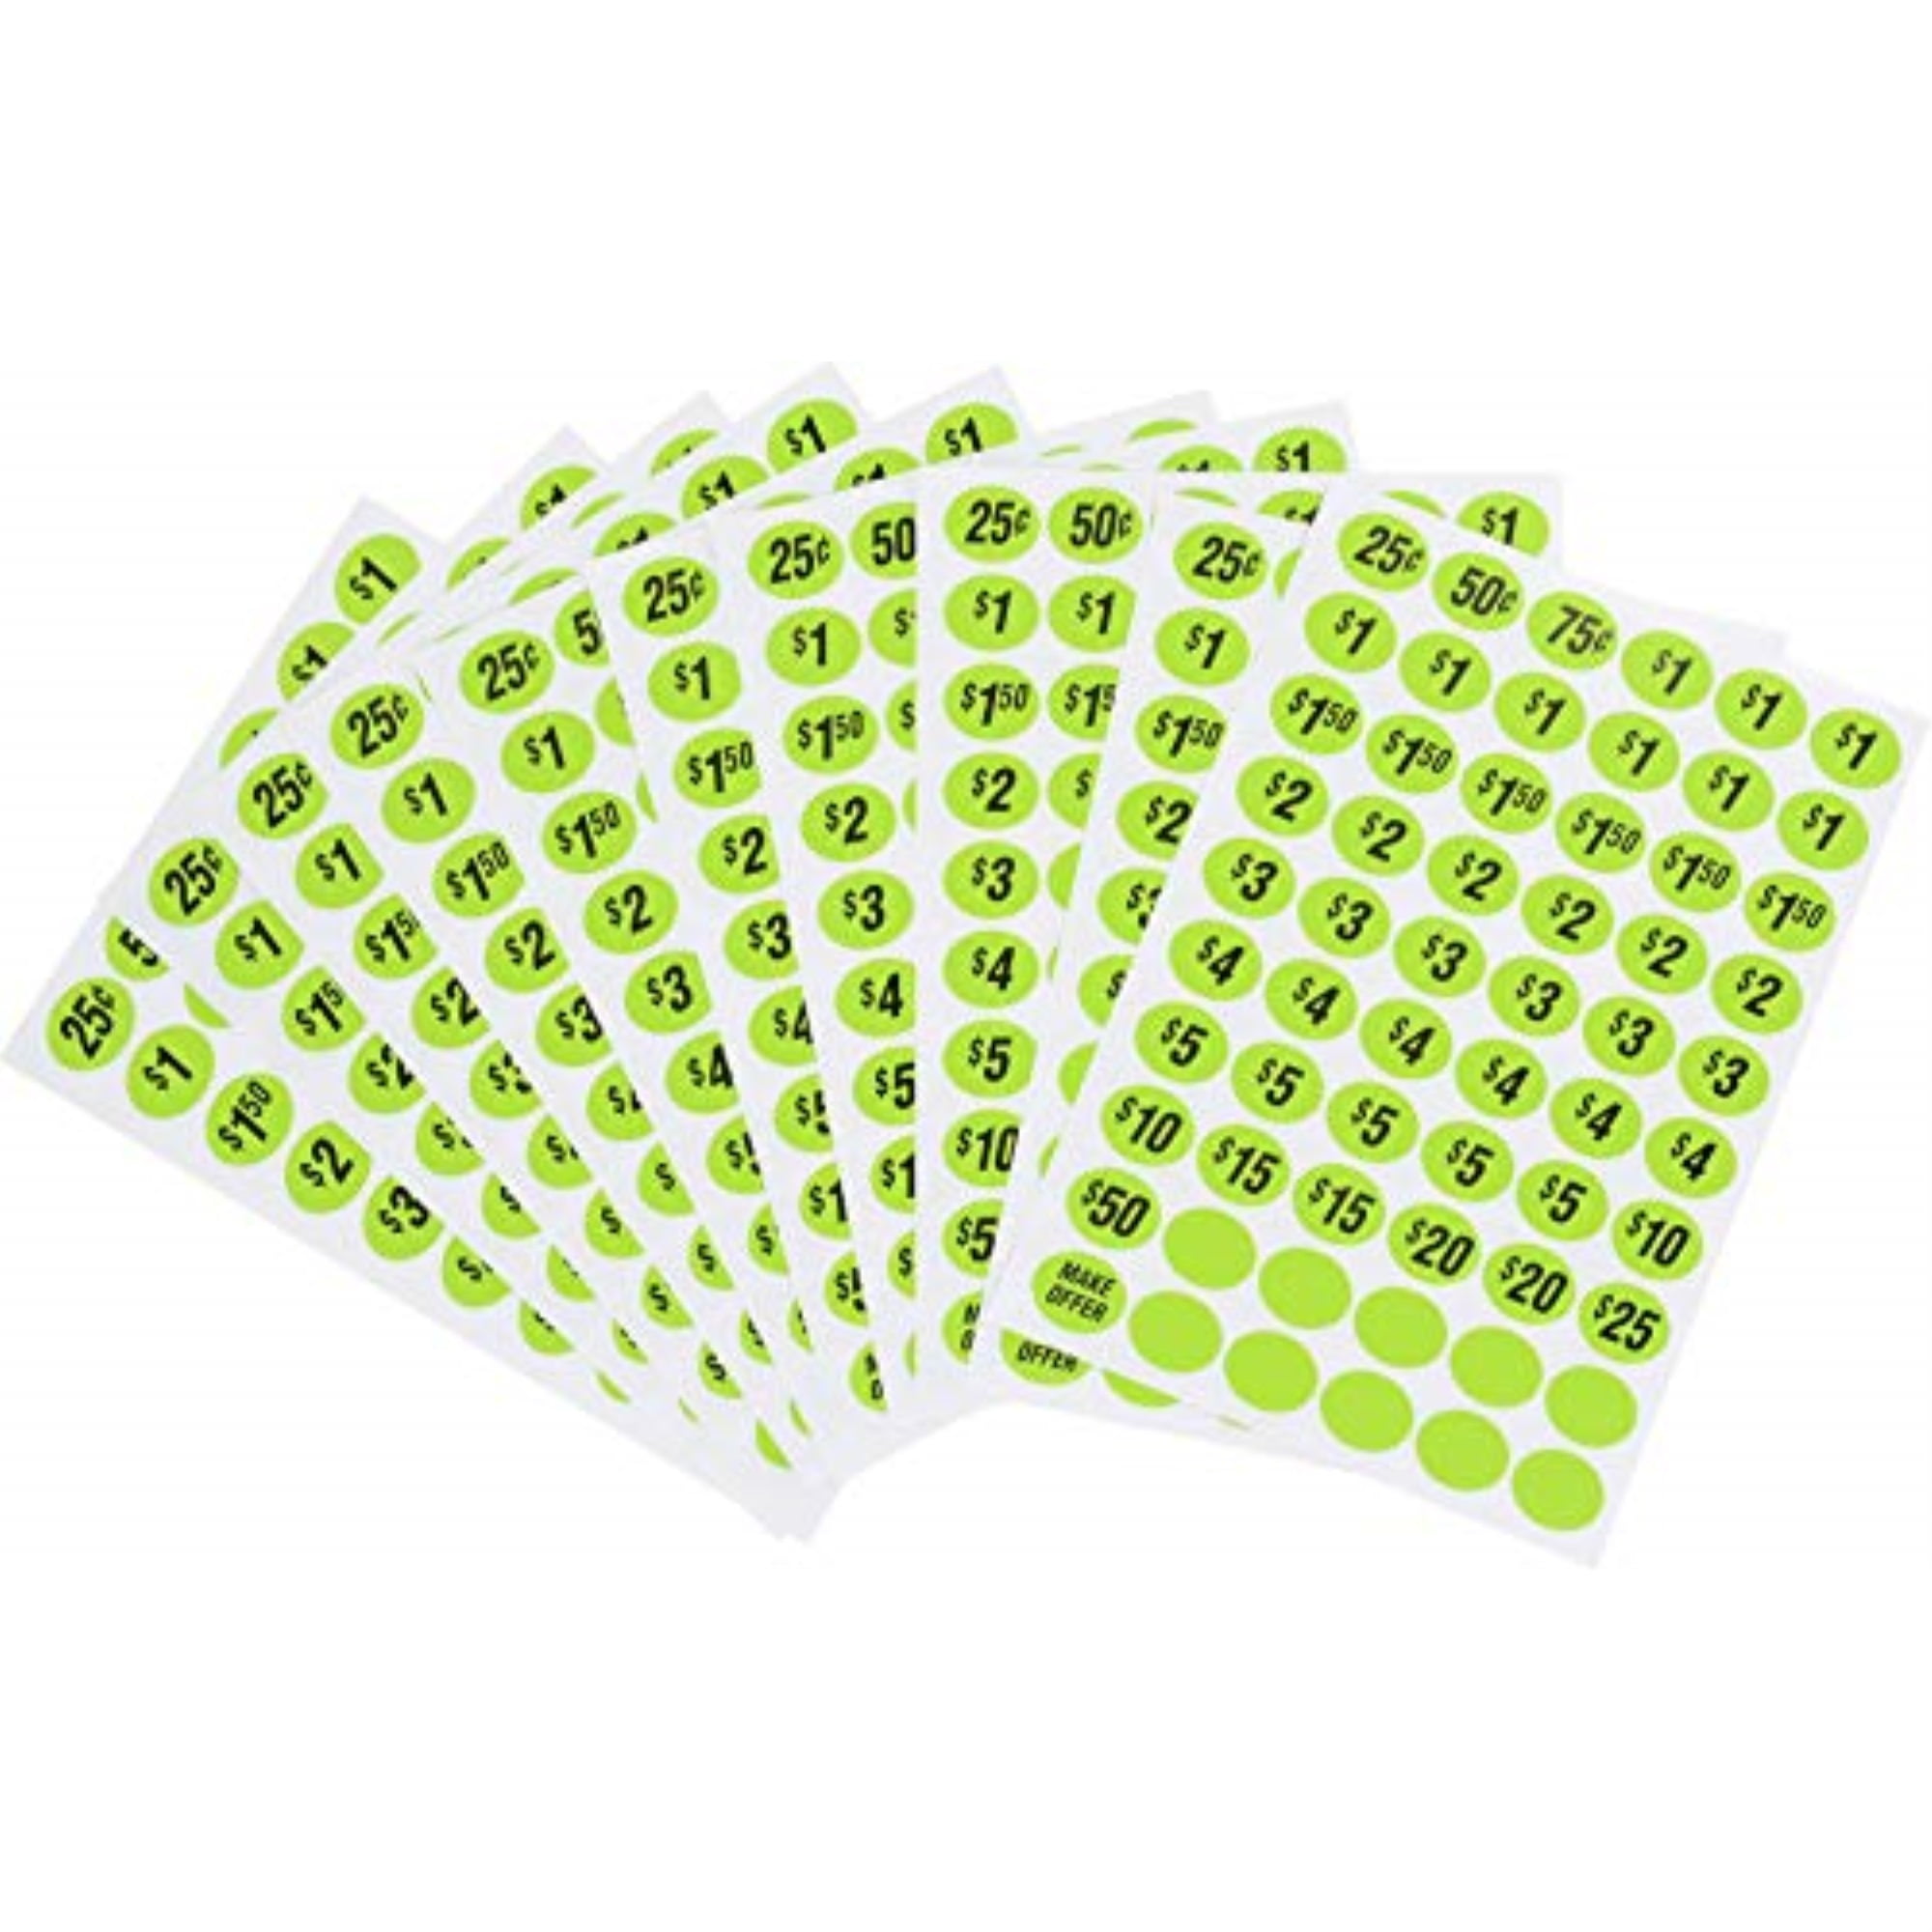 NEW PACK OF 1000 REMOVABLE OVAL SELF STICK ADHESIVE STORE PRICE STICKERS LABELS 